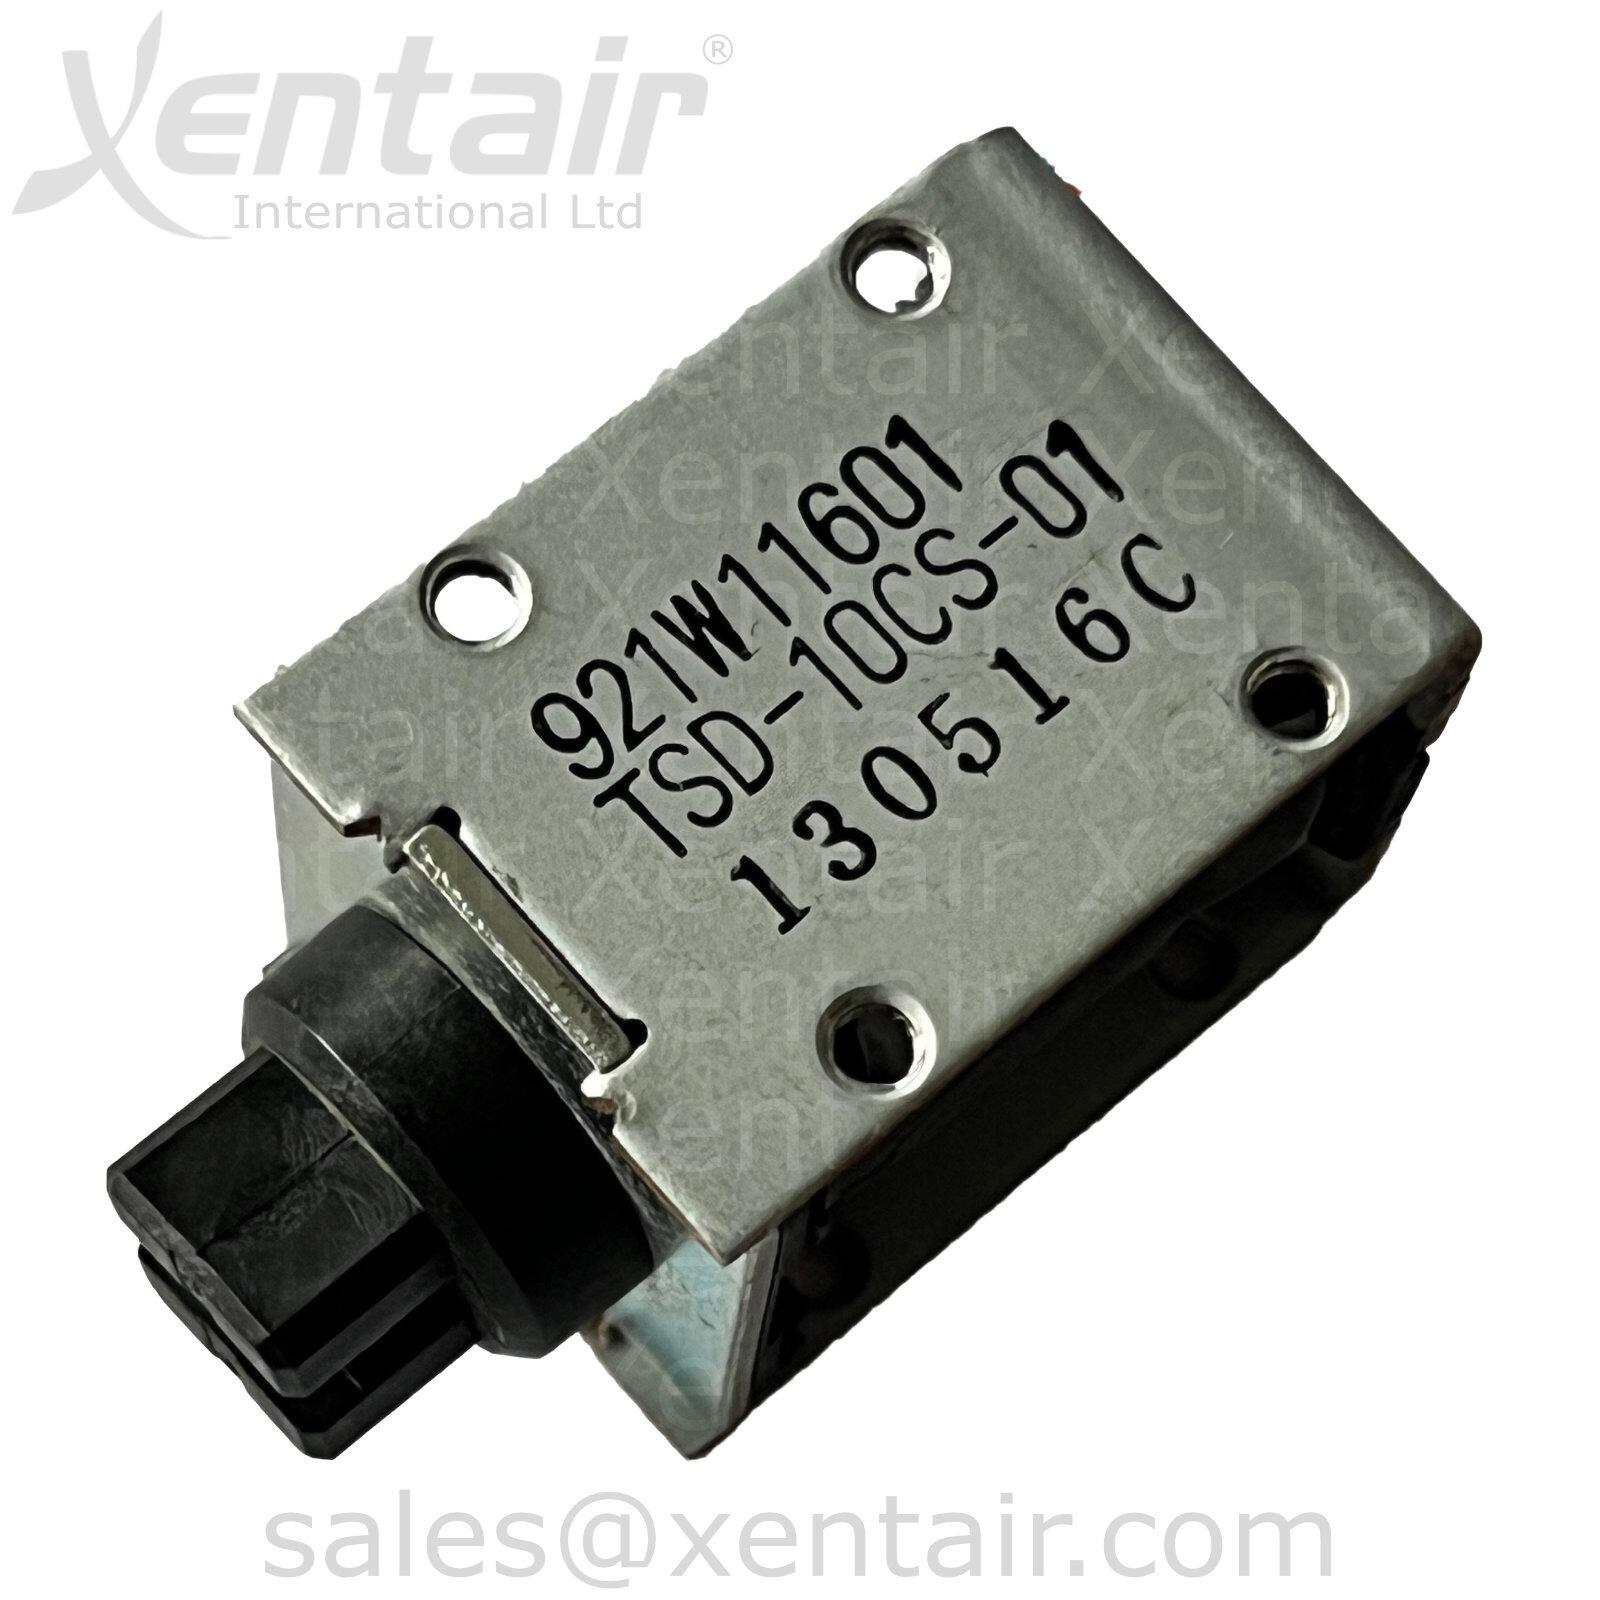 Xerox® WorkCentre™ 7525 7530 7535 7545 7556 7830 7835 7845 7855 7970 Solenoid Assembly 121K37100